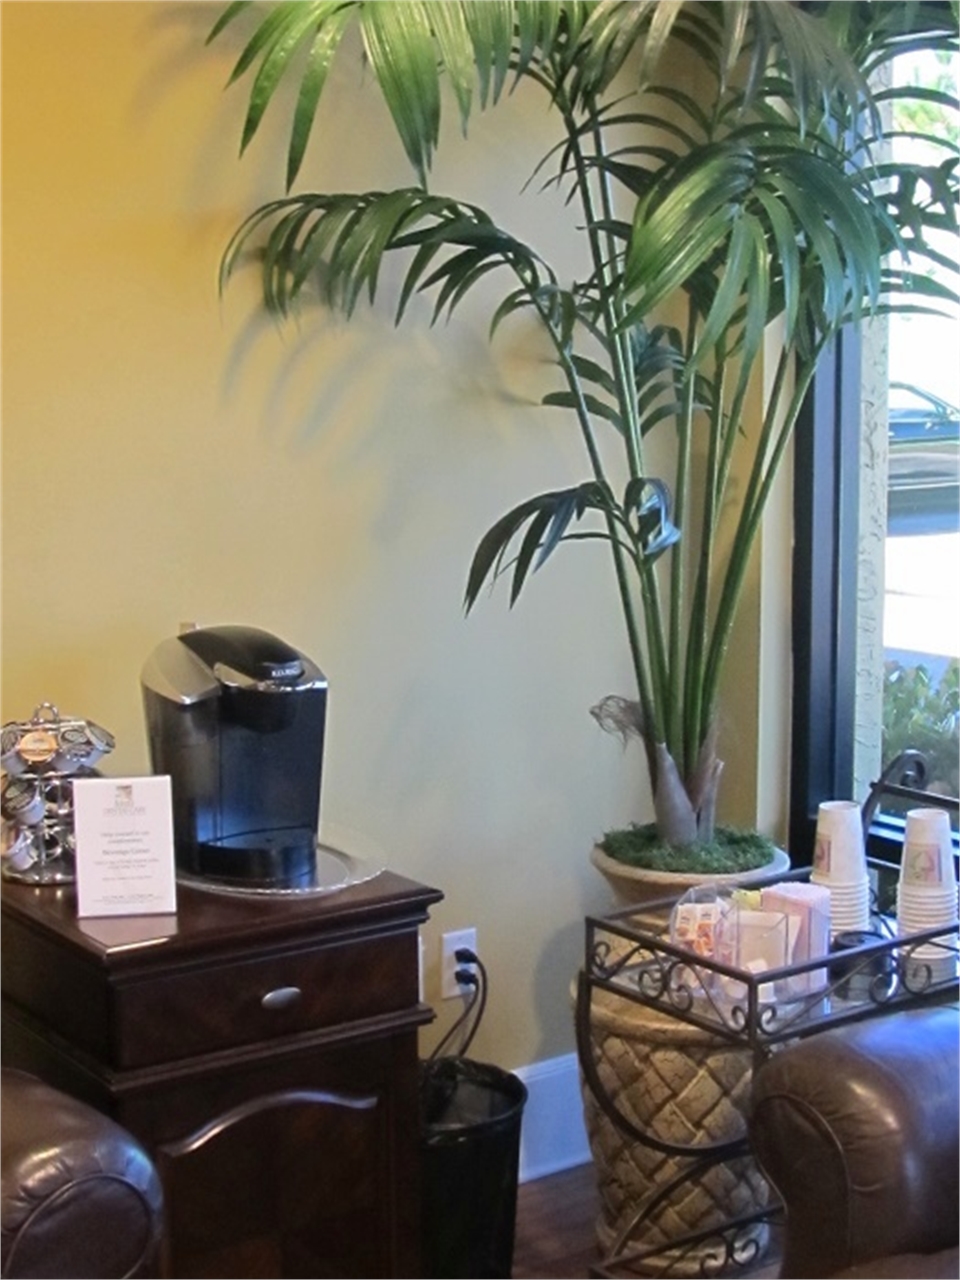 Refreshments at our orthodontic care office in Bonita Springs FL